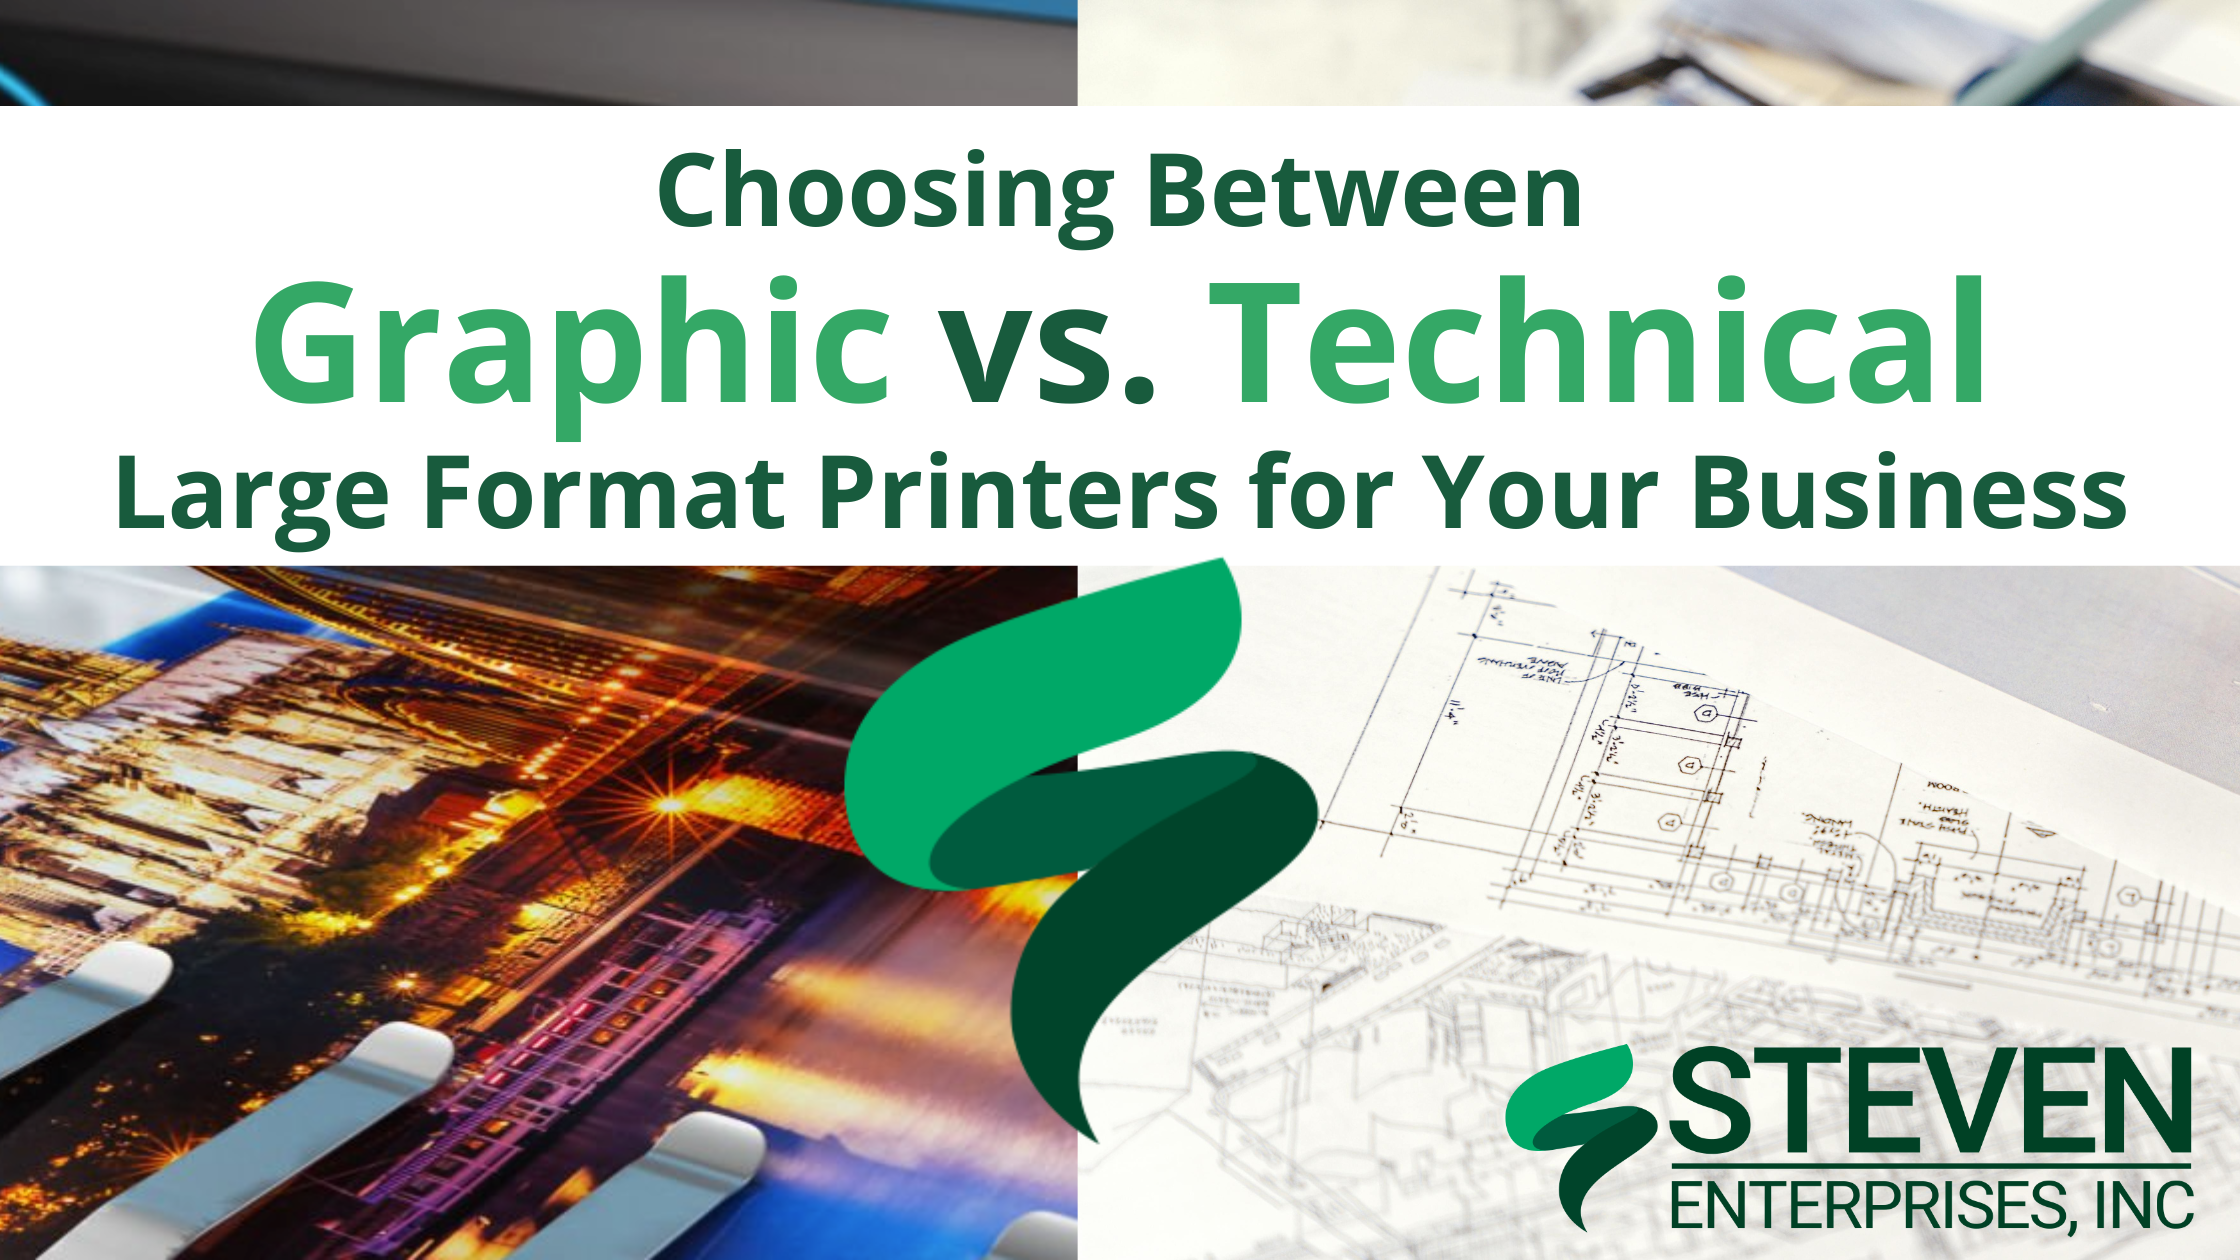 Choosing Between Graphic and Technical Large Format Printers for Your Business